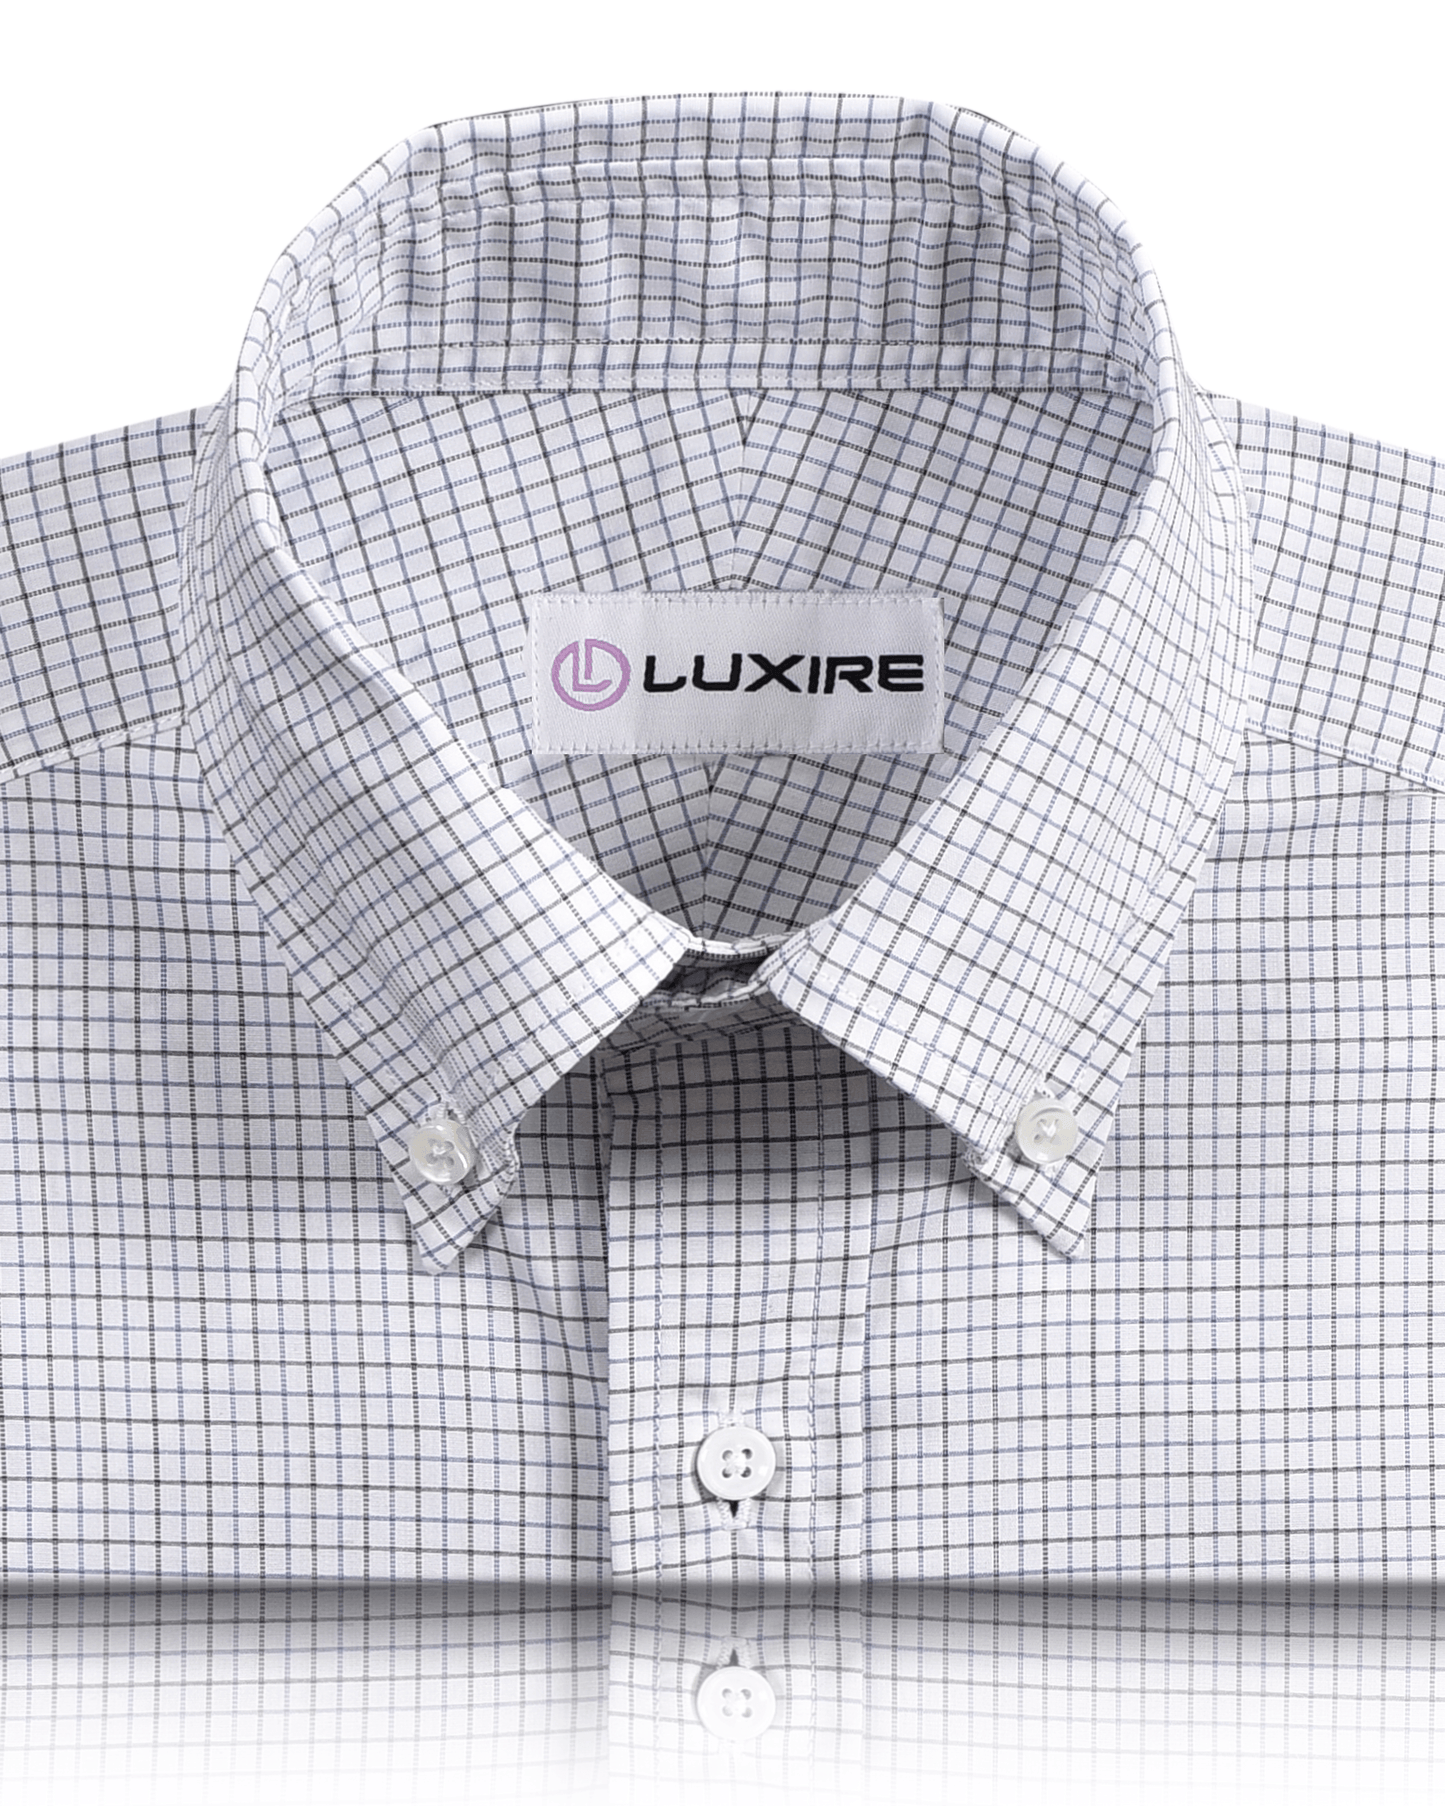 Front close view of custom check shirts for men by Luxire blue and black tattersall checks